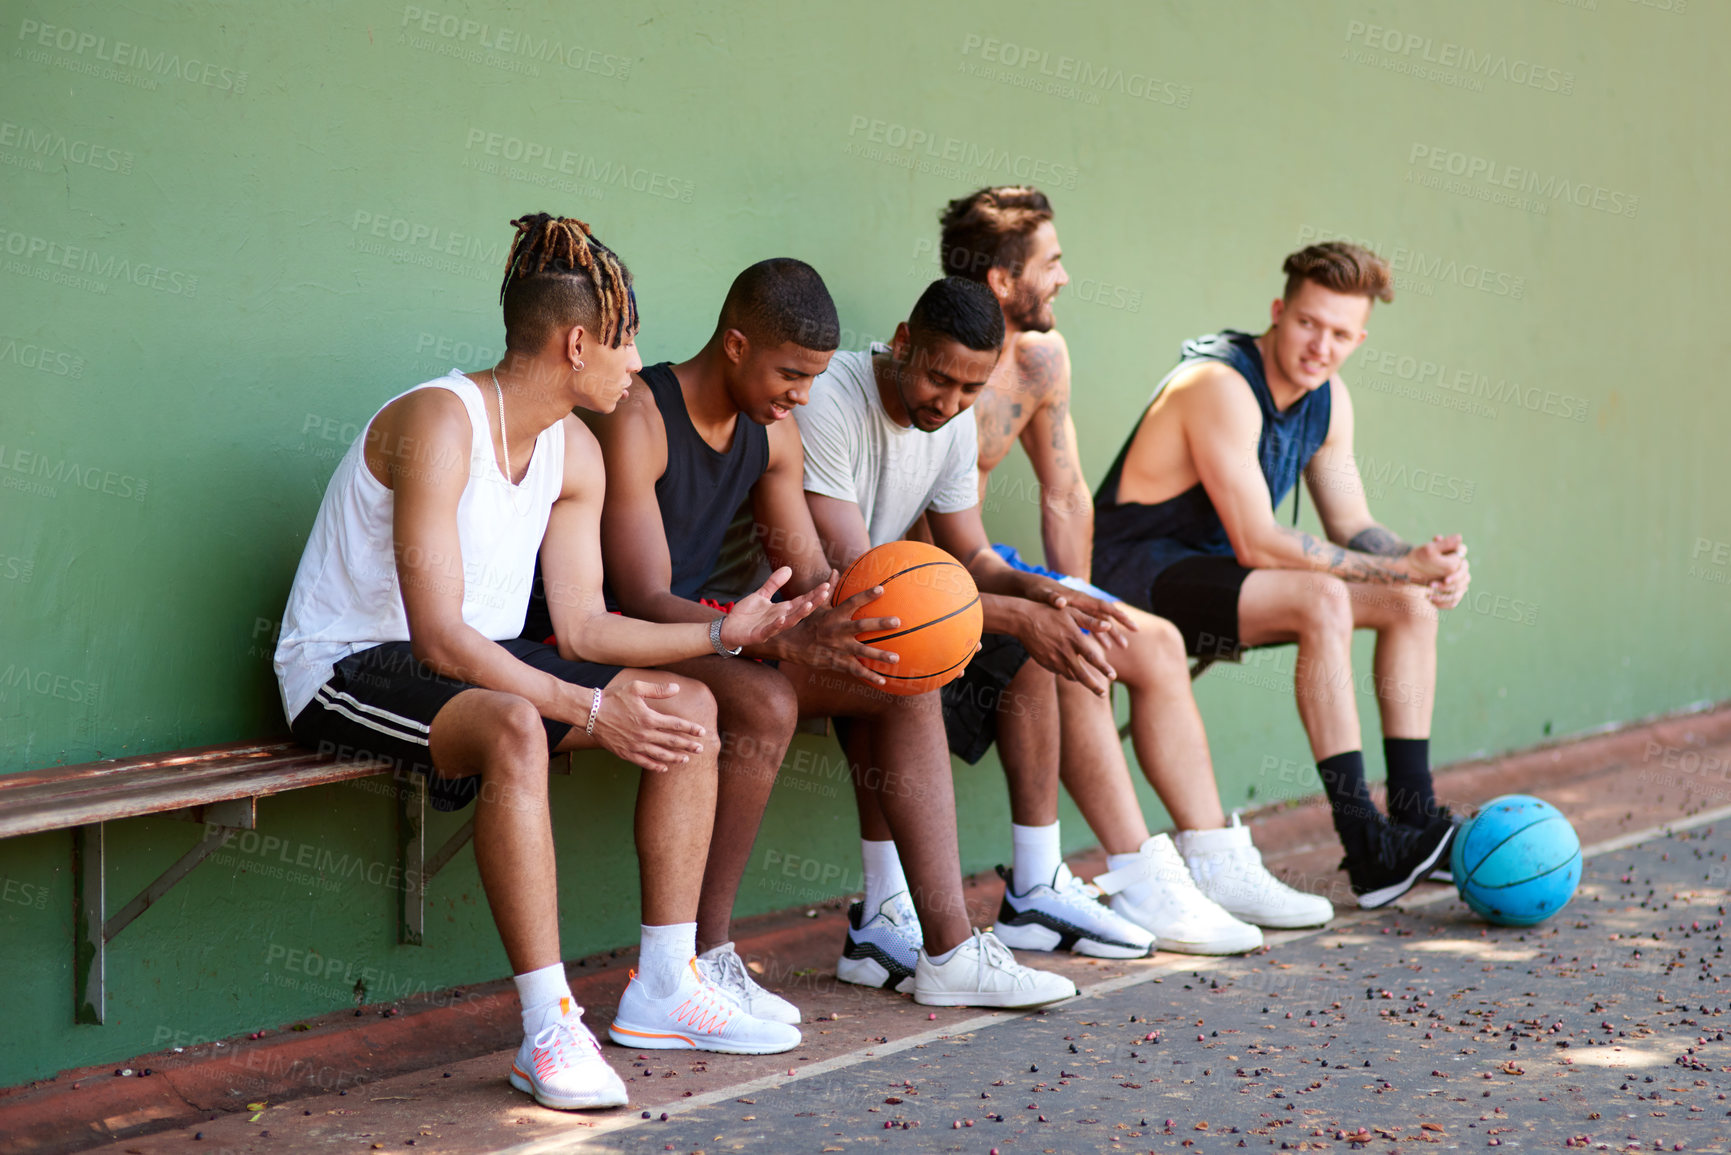 Buy stock photo Shot of a group of sporty young men taking a break after a game of basketball